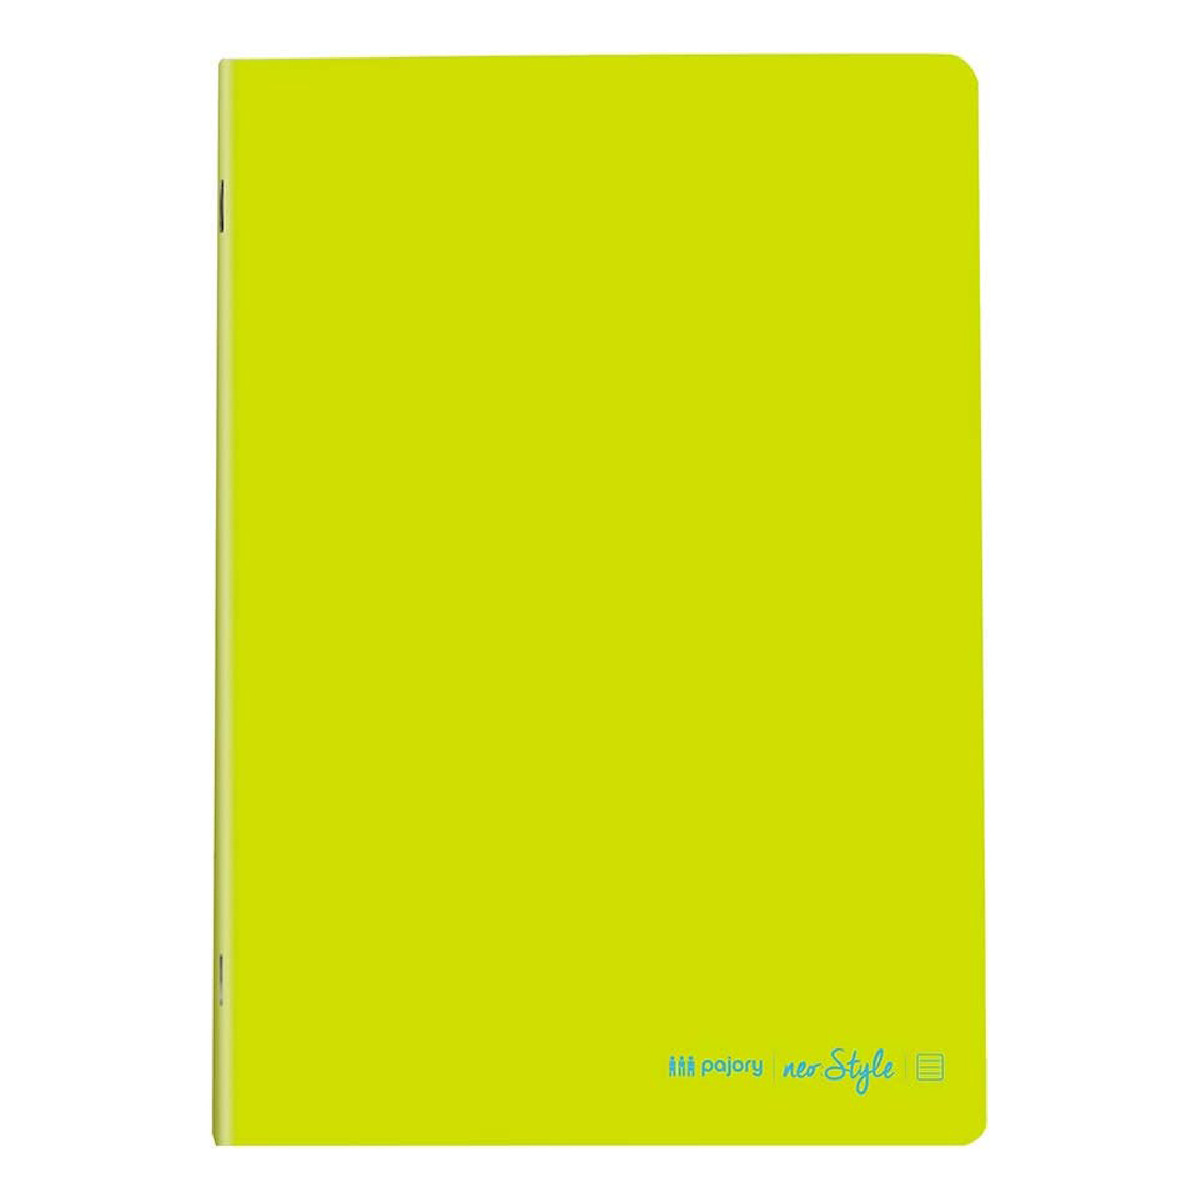 Maxi Glossy Neostyle A4 Size Notebook, 60 Sheets, MX-NEOSTYLEA4-NB